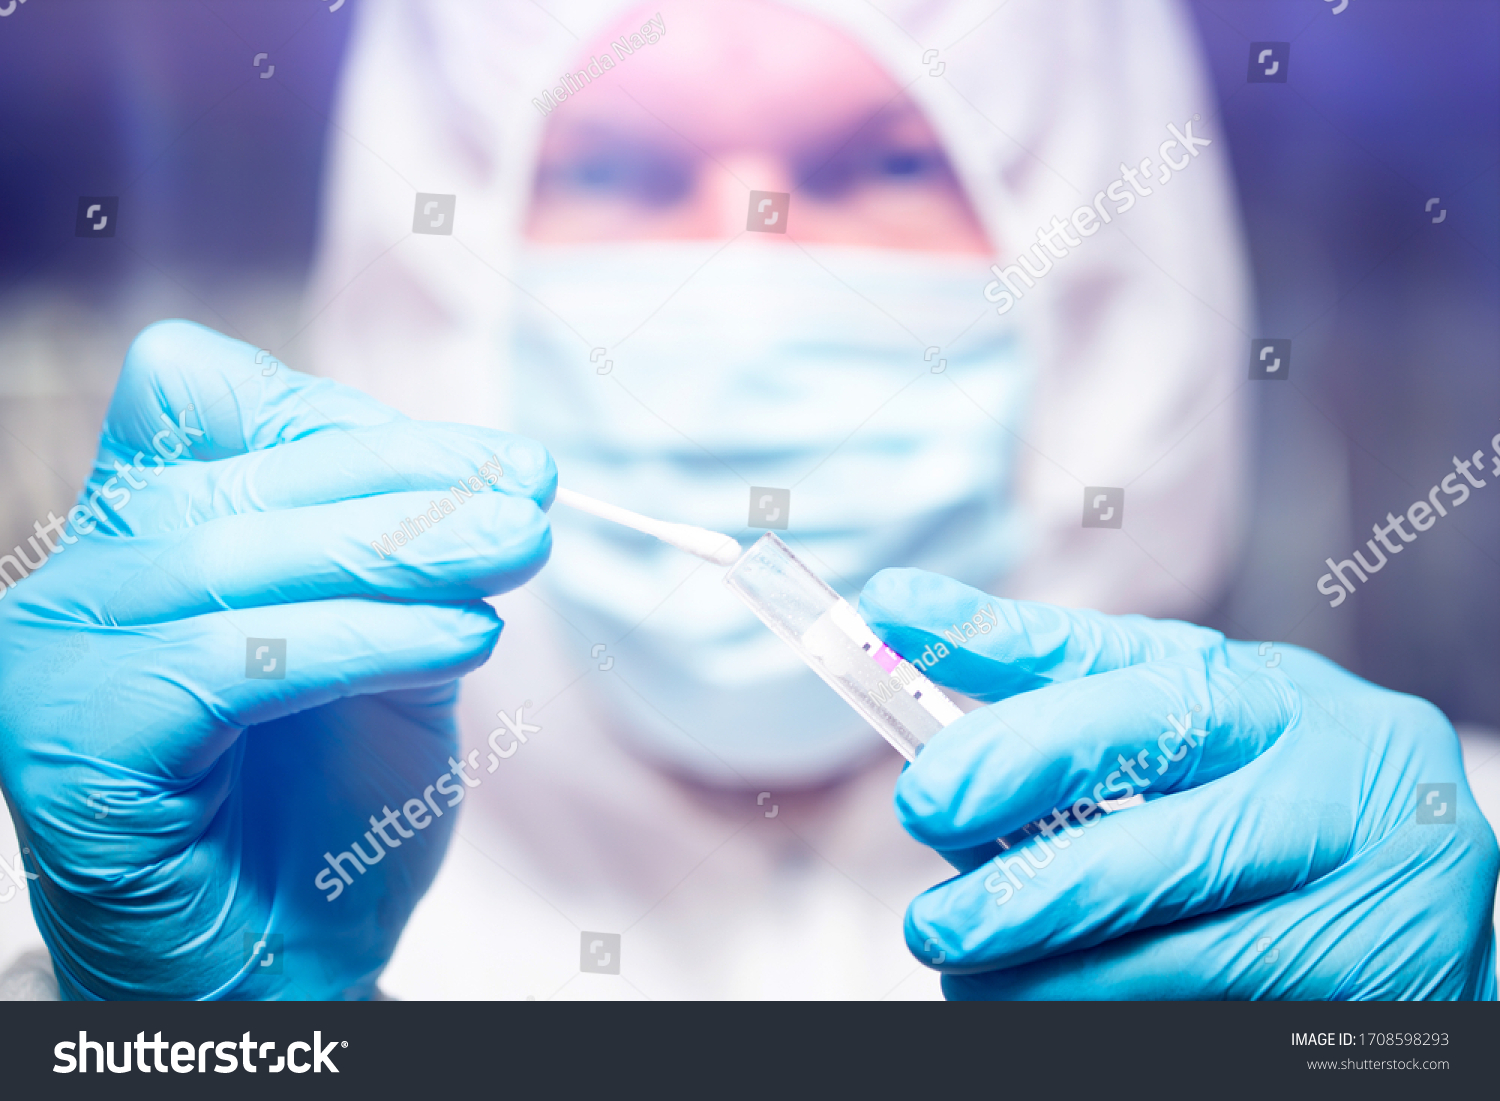 Concept of COVID-19 - Coronavirus disease - 2019-nCoV. Doctor holding blood sample for analysis and sampling of Covid-19 infectious disea. #1708598293